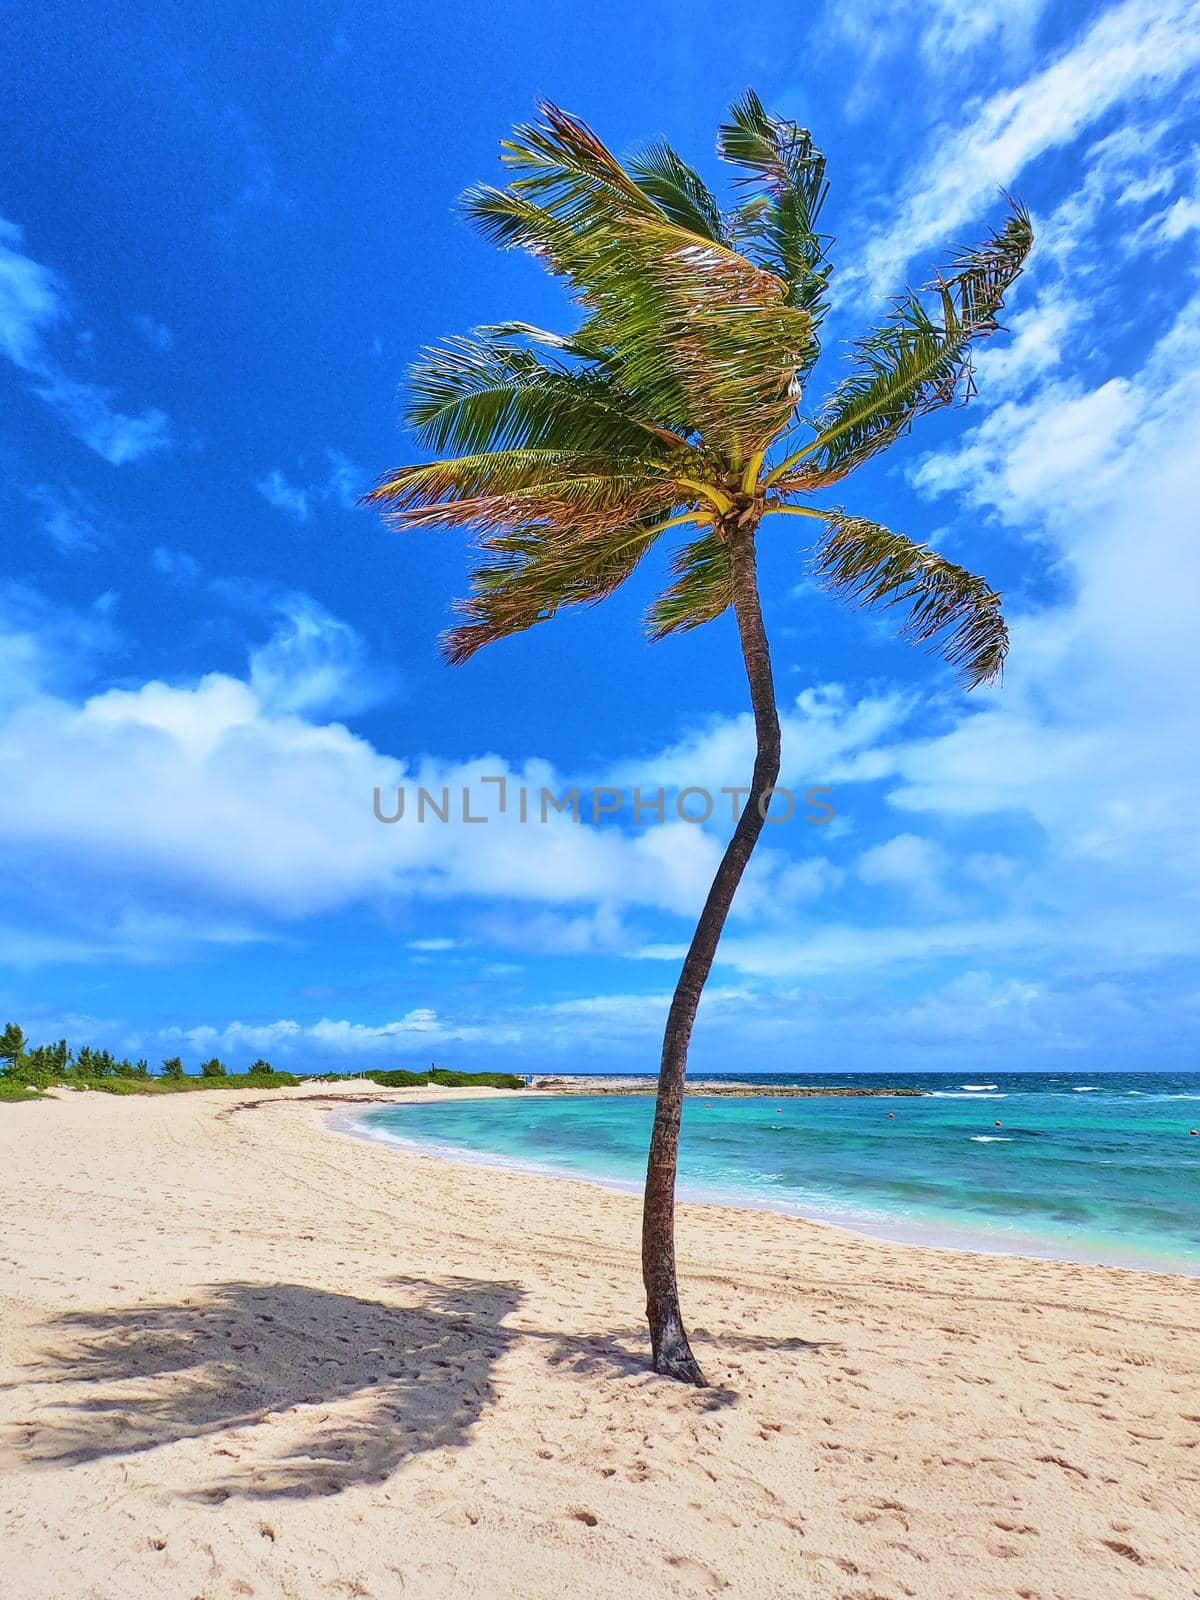 Vertical of single palm tree on sandy white beach against blue tropical ocean and blue sky by njproductions